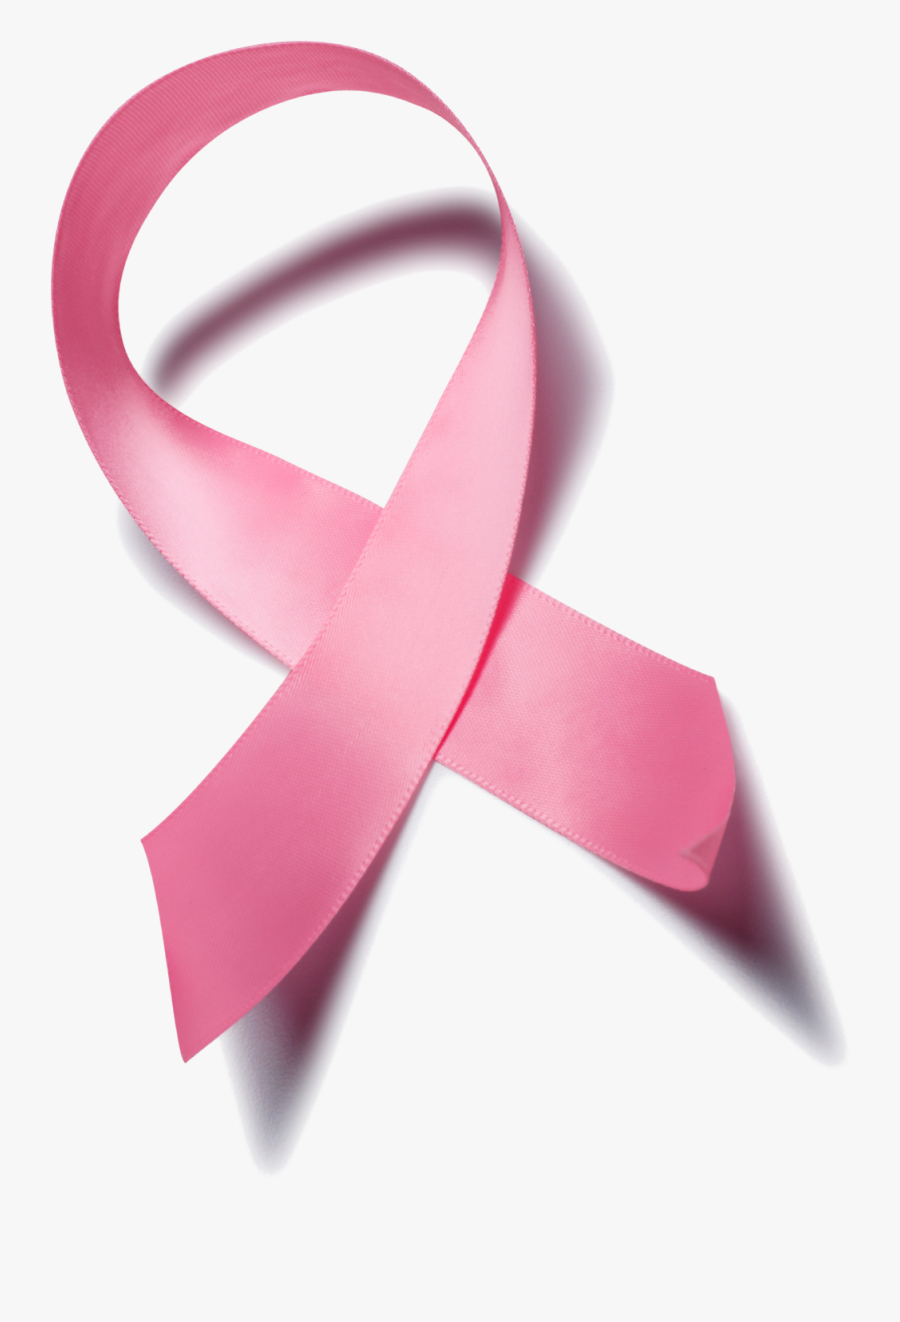 Breast Cancer Ribbon Vector Png - Real Breast Cancer Ribbon Png, Transparent Clipart